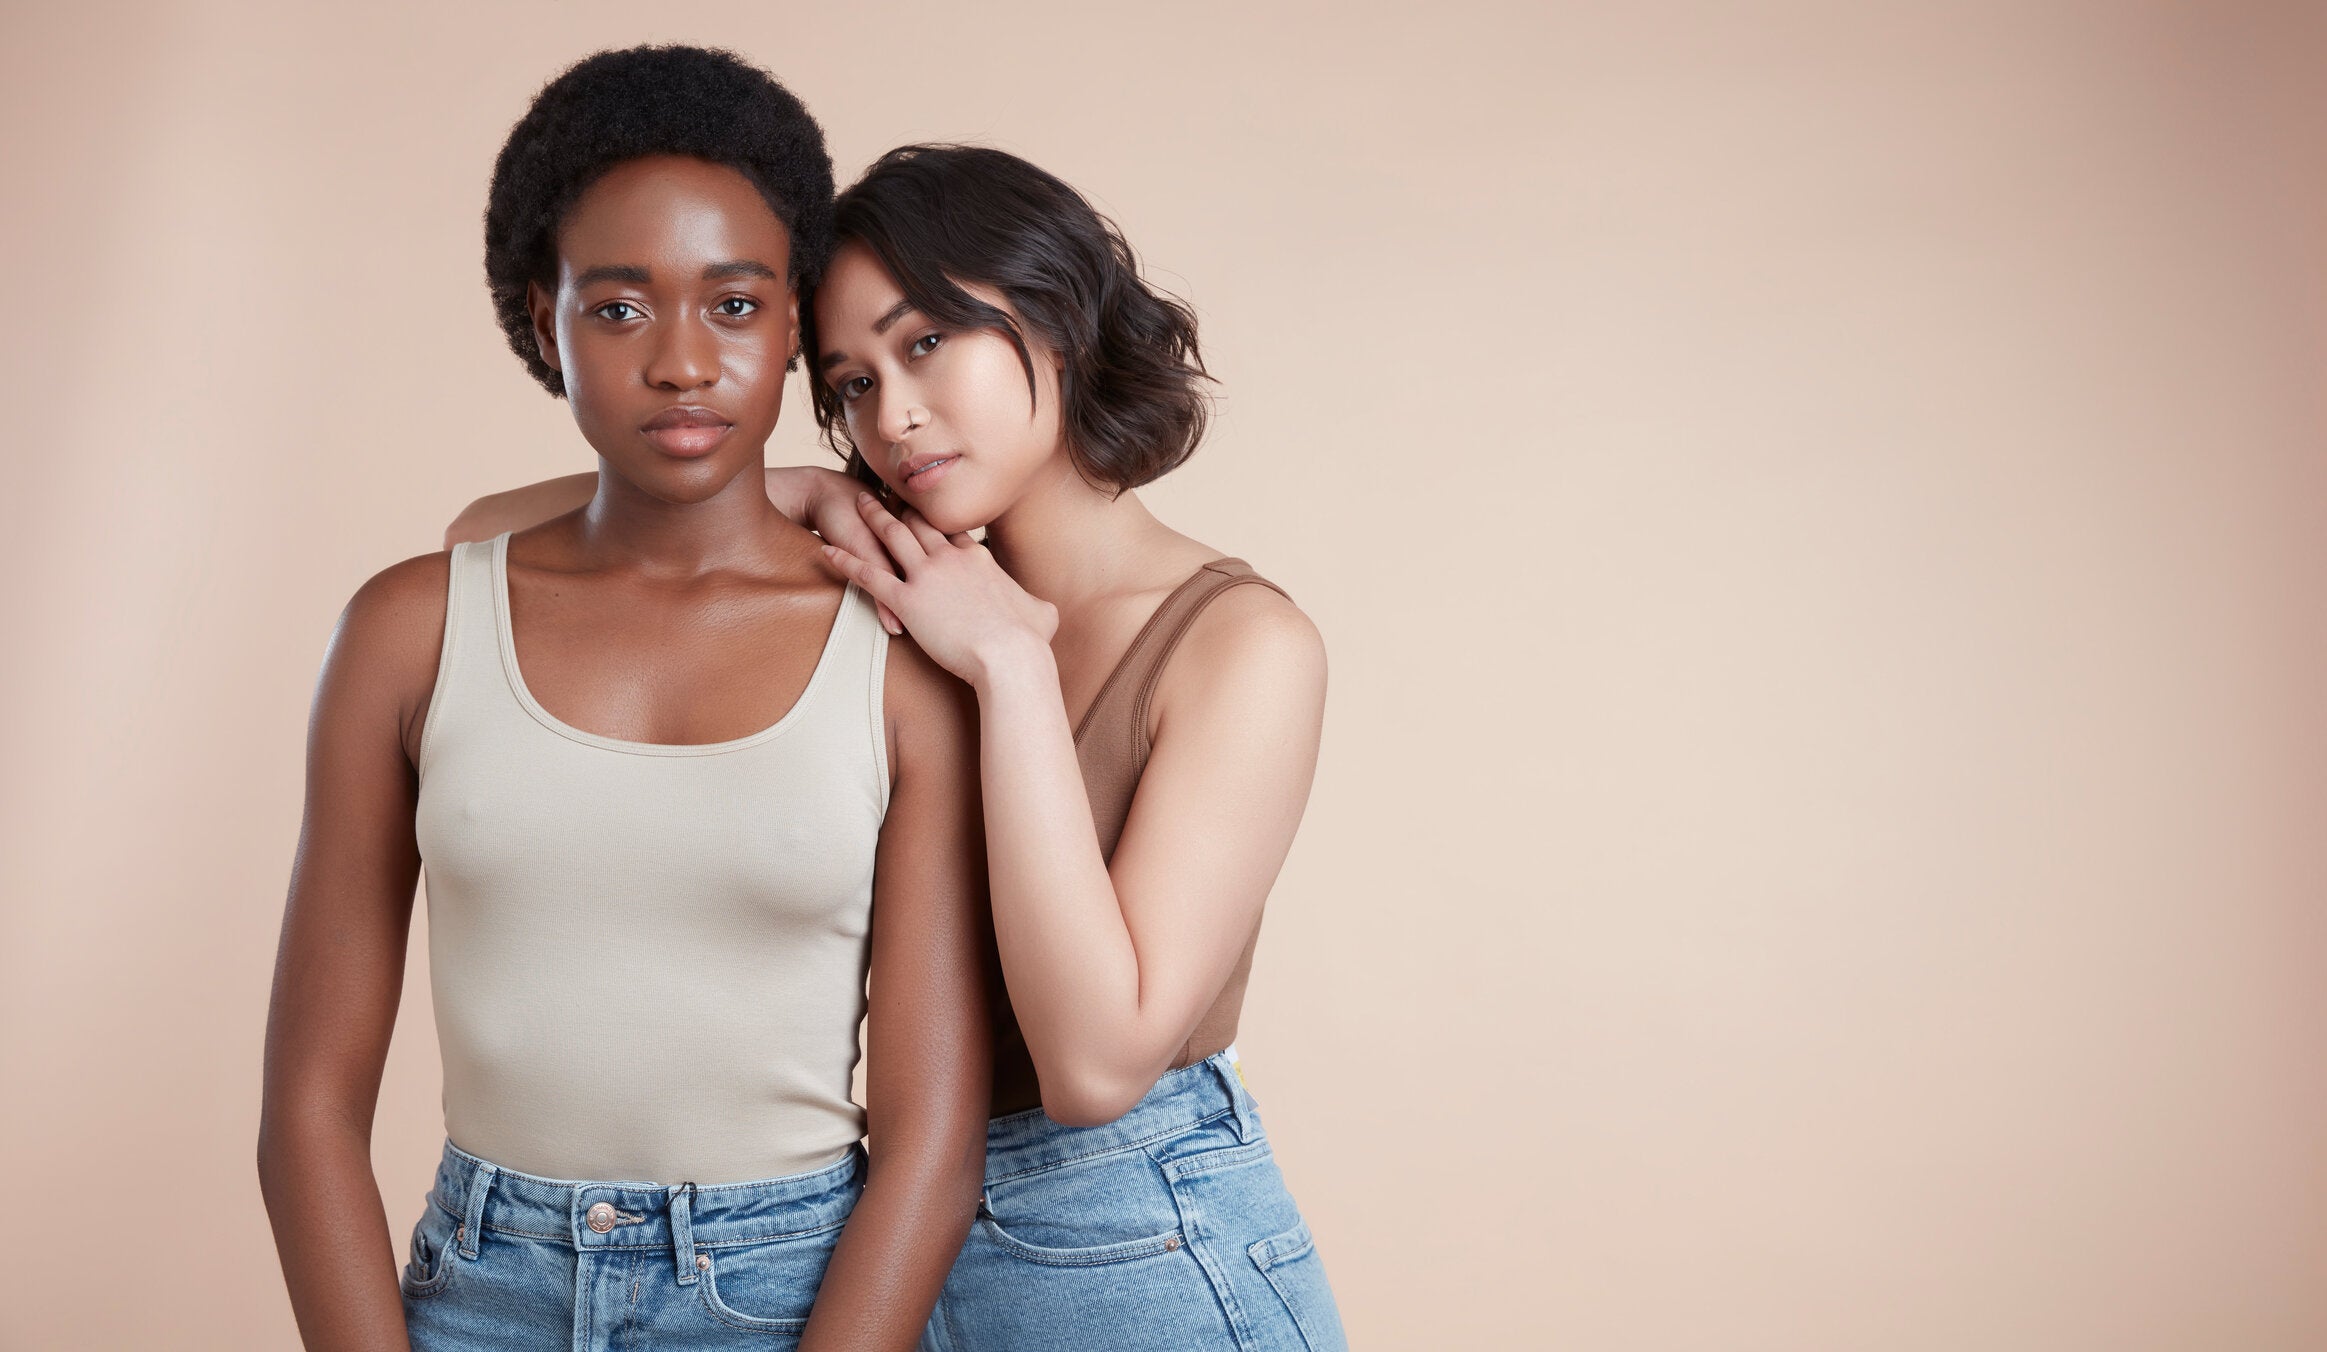 Two female models are looking at the camera with a neutral expression. The model on the left has short black afro hair and the model on the right has a wavy bob. Both models are wearing neutral tops and are standing in front of a neutral backdrop.